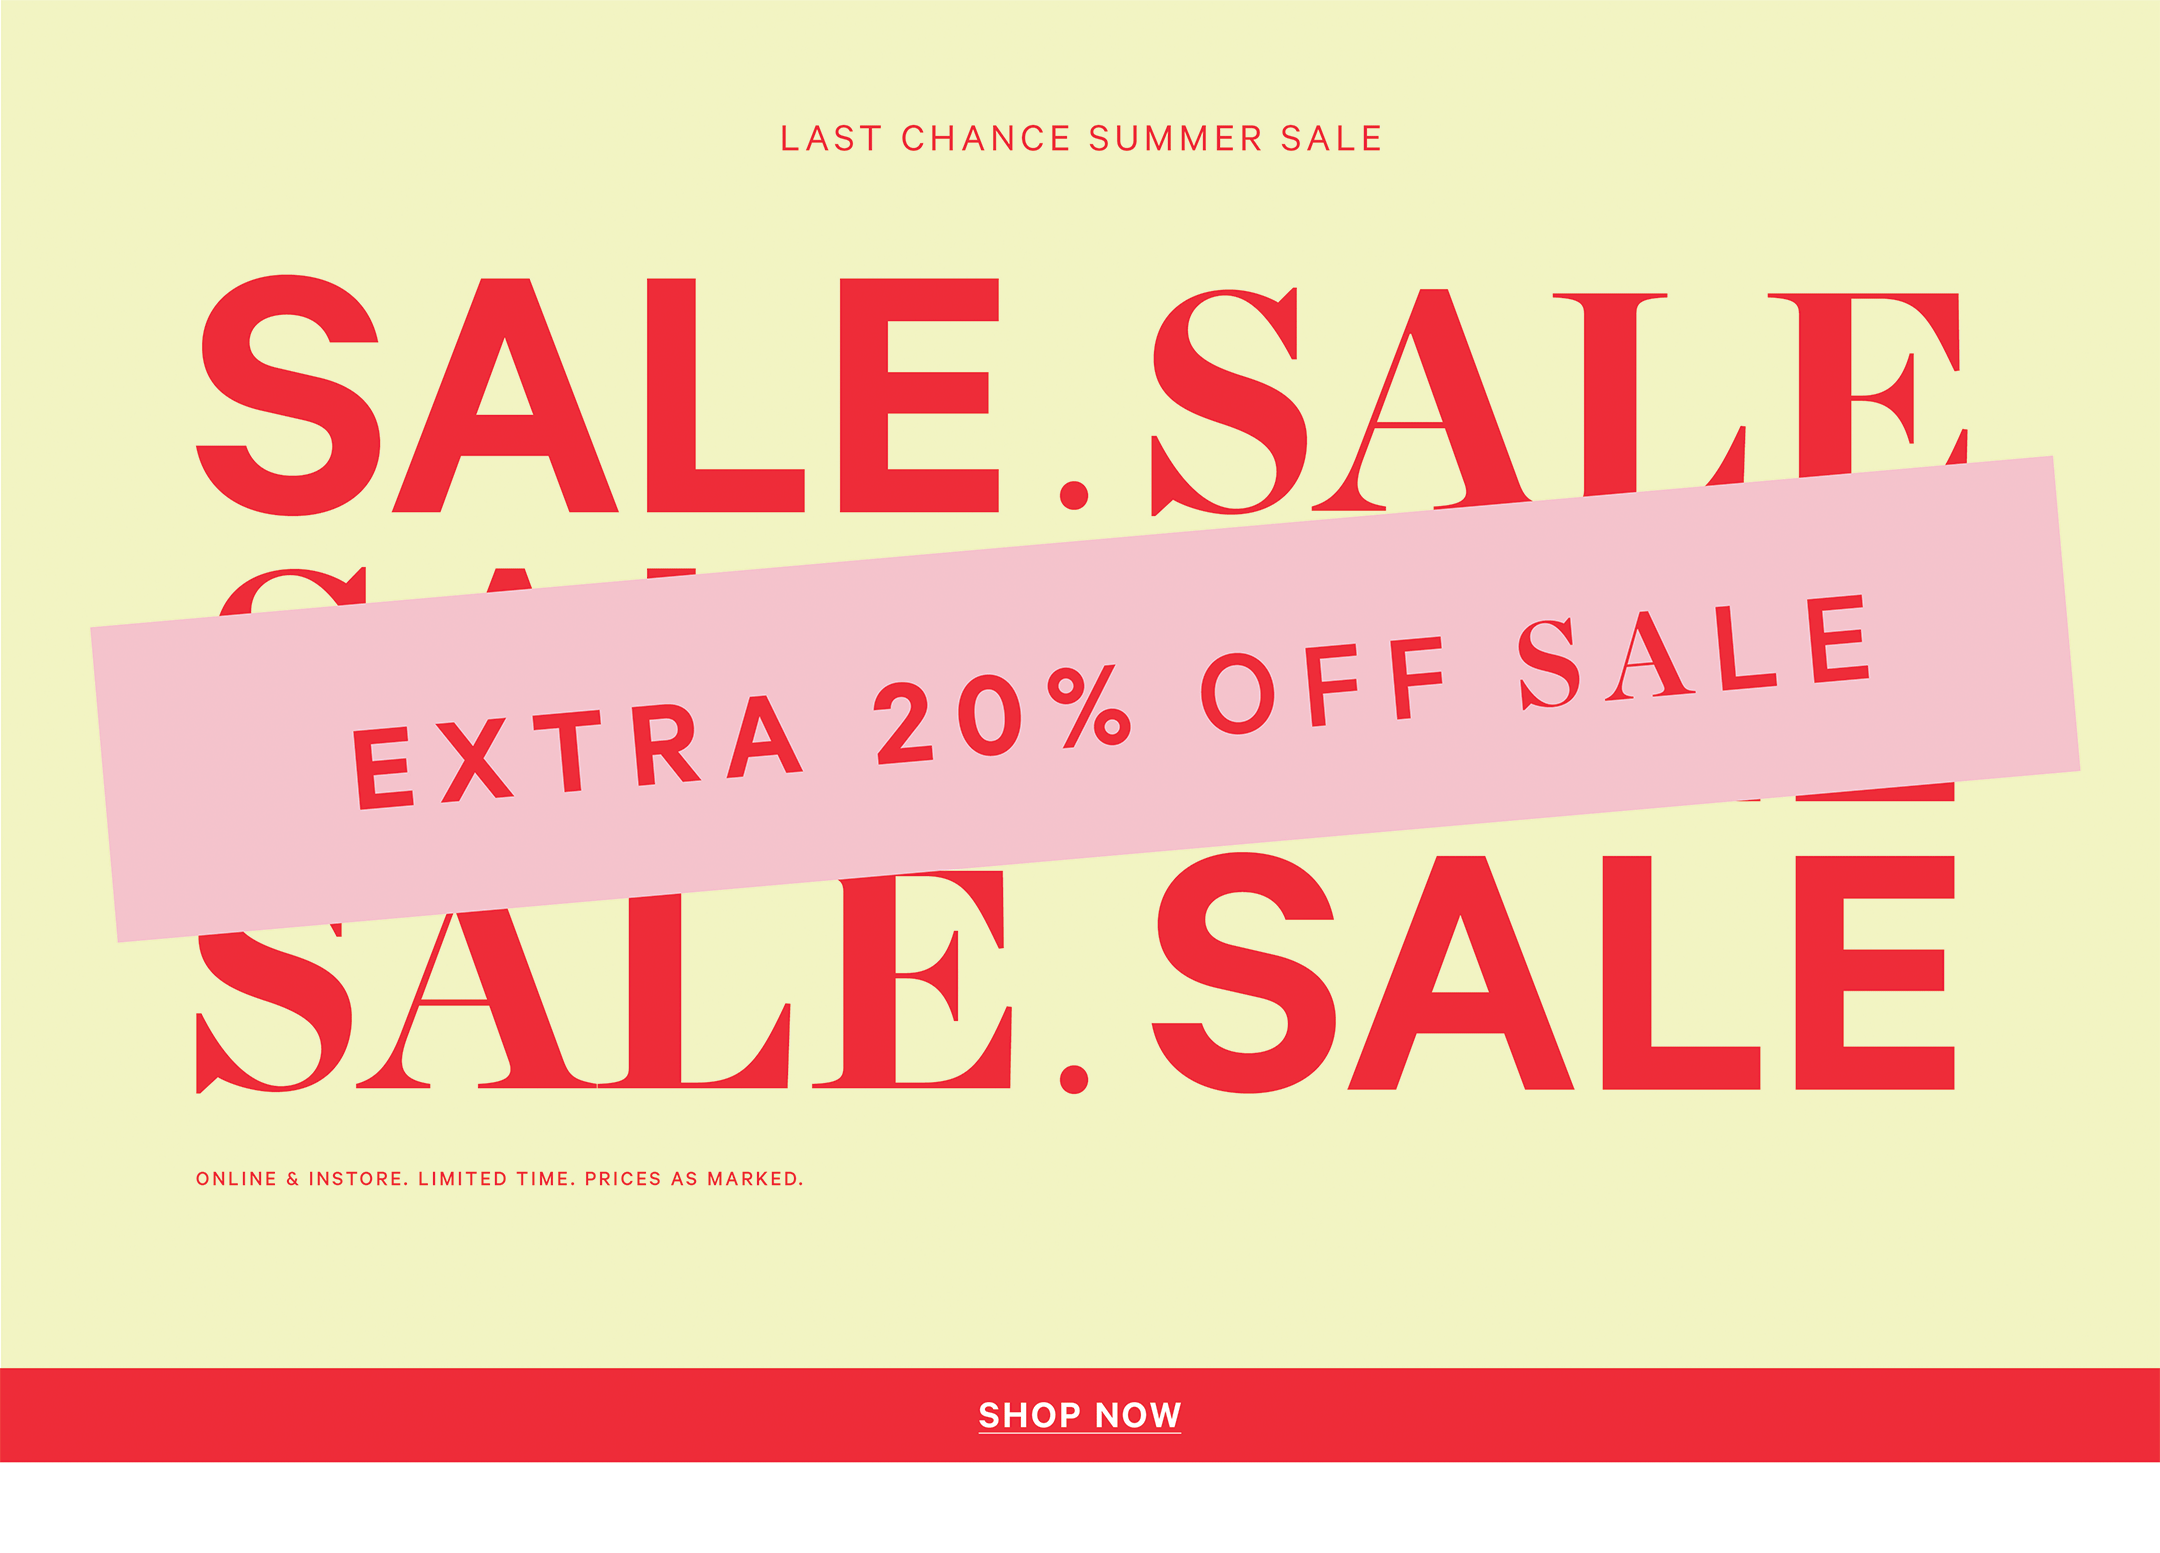 Extra 20% Off Sale! Online & Instore*